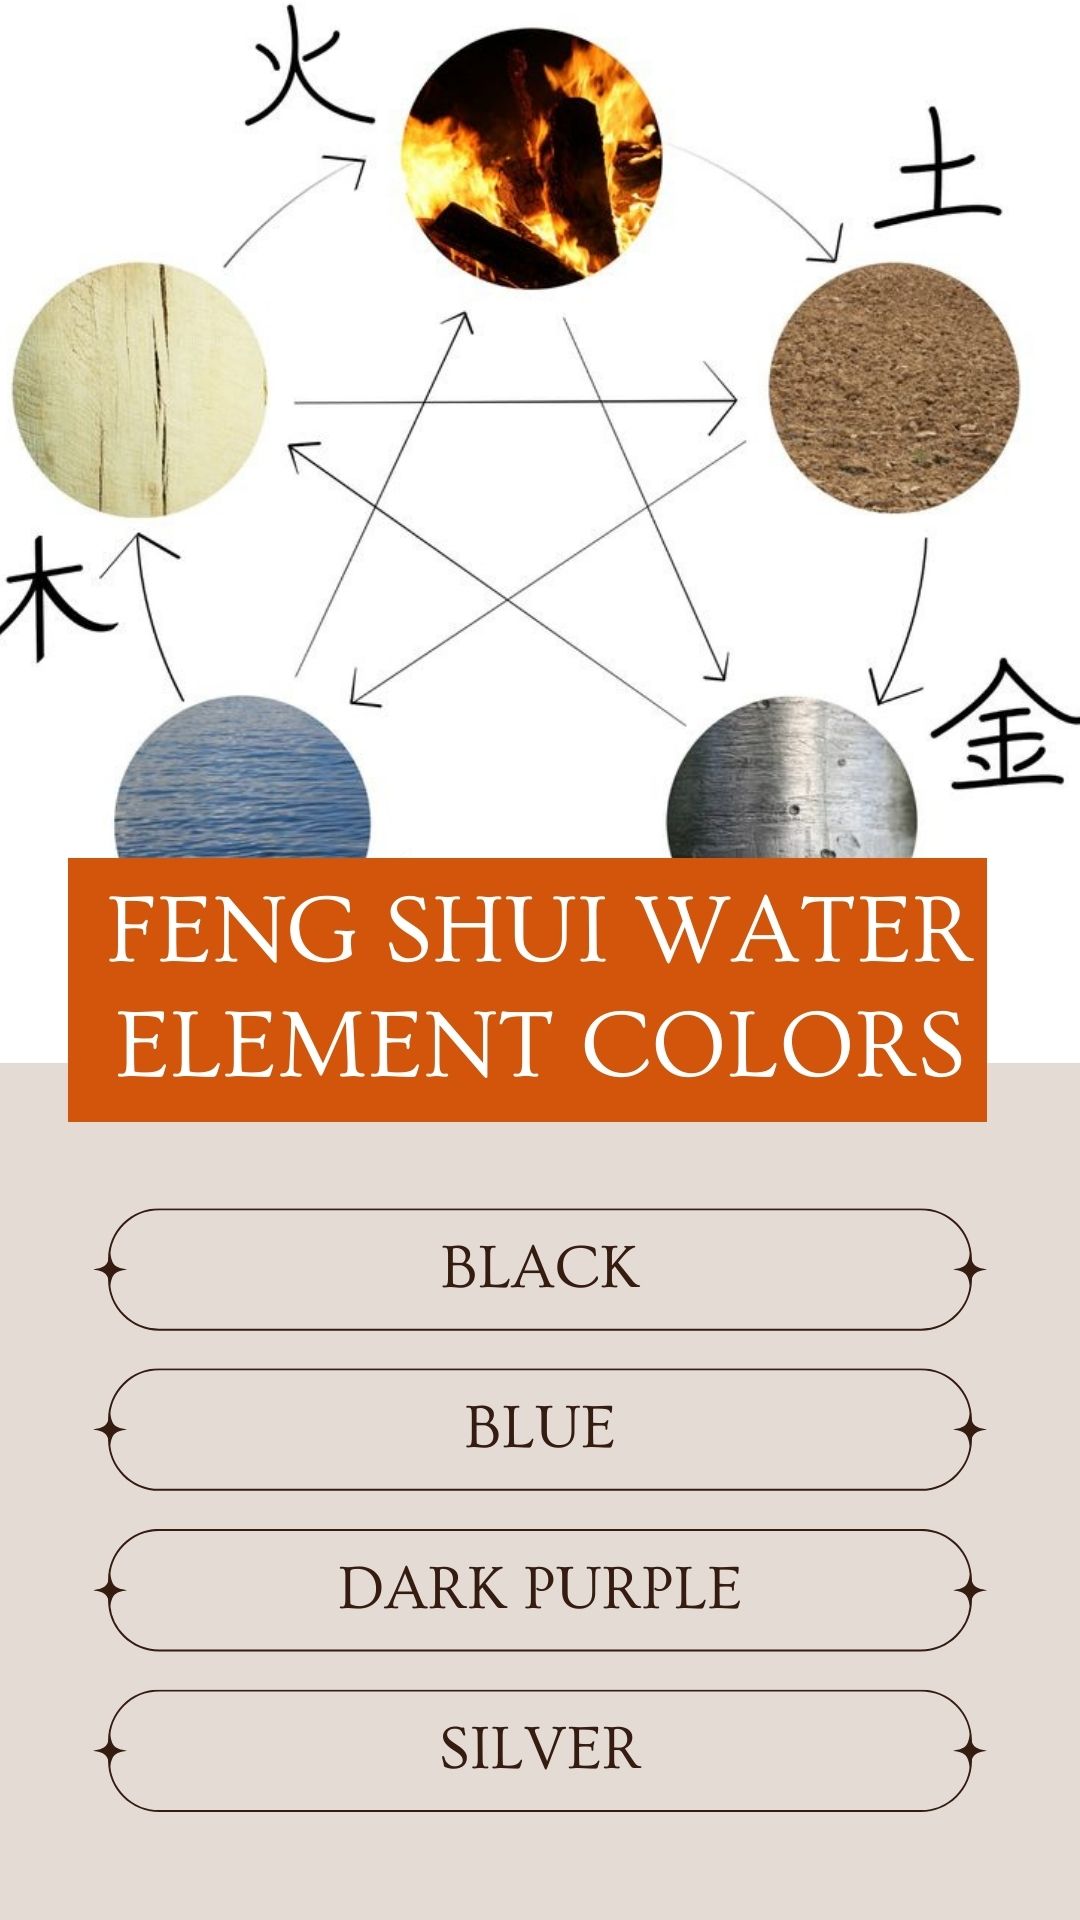 Feng Shui Water Element Colors